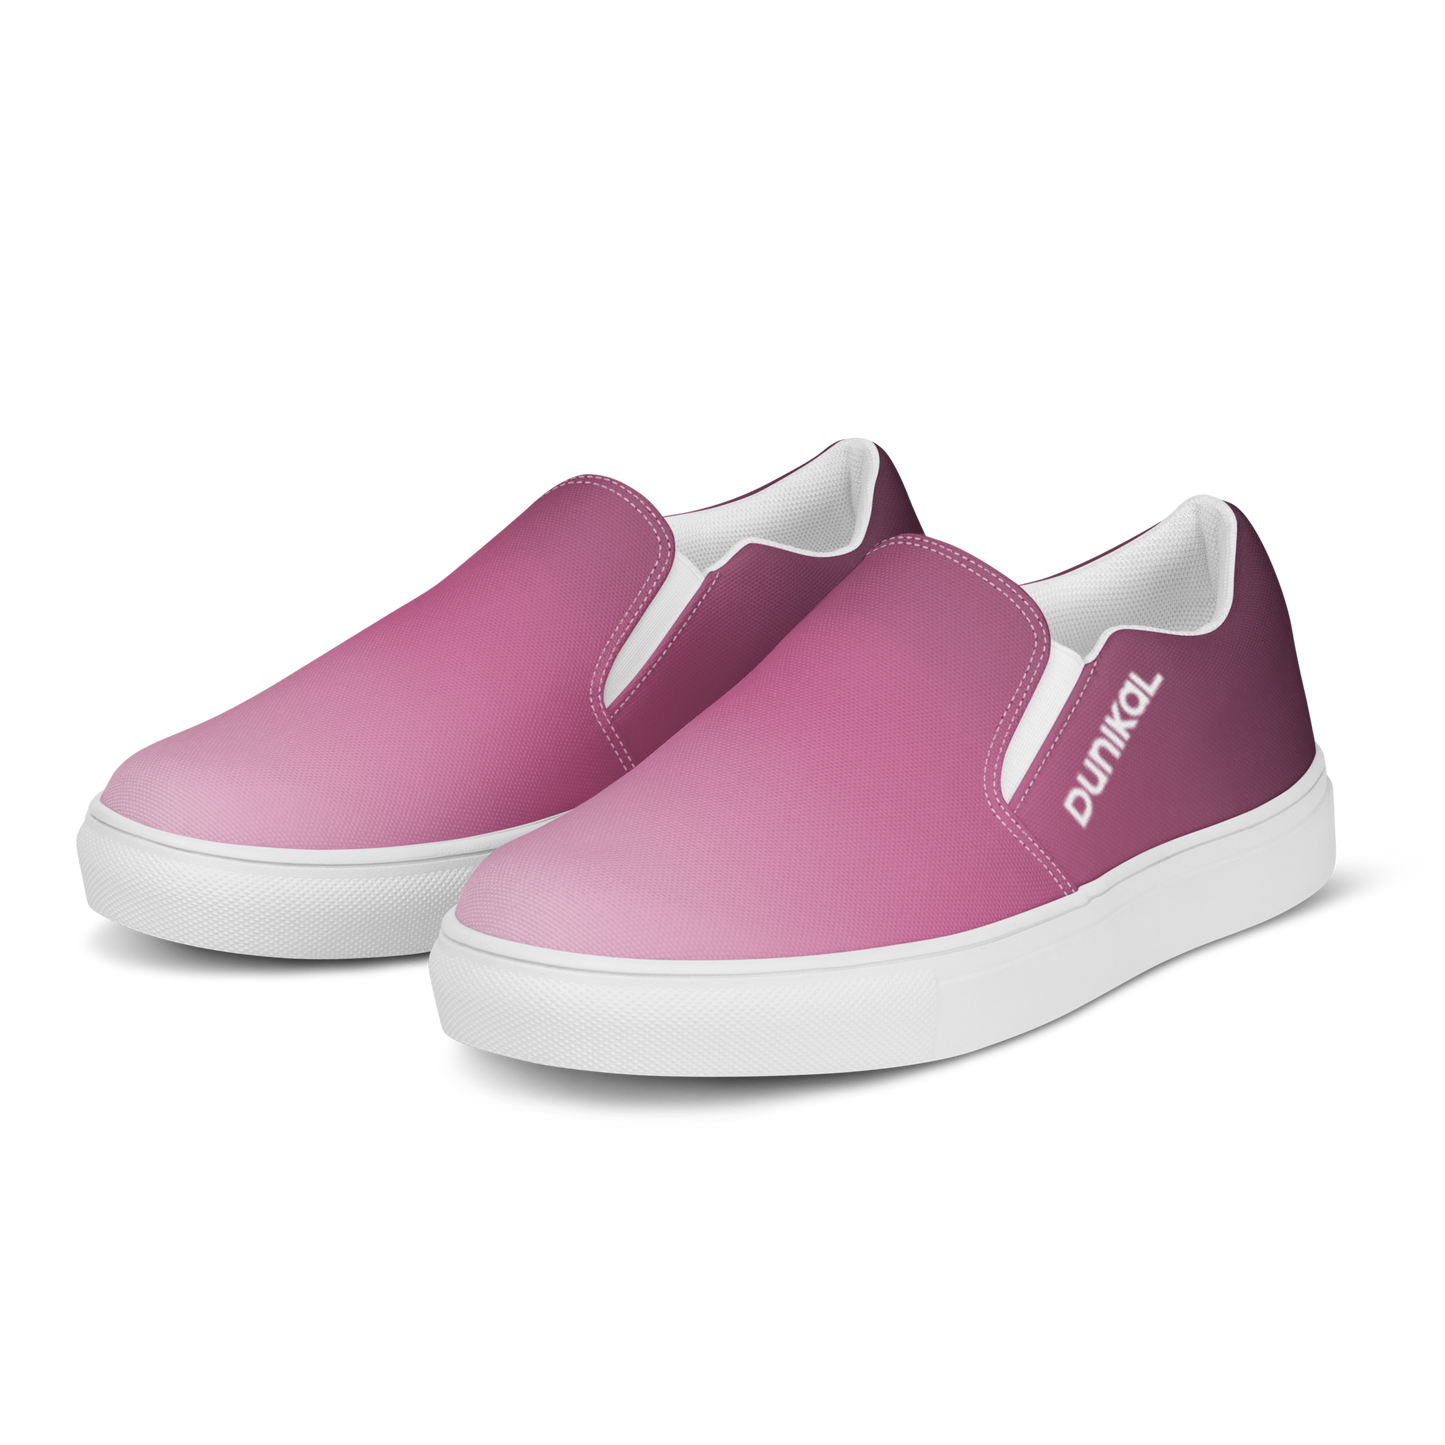 Women's Canvas Slip-Ons ❯ Pure Gradient ❯ Orchid Pink